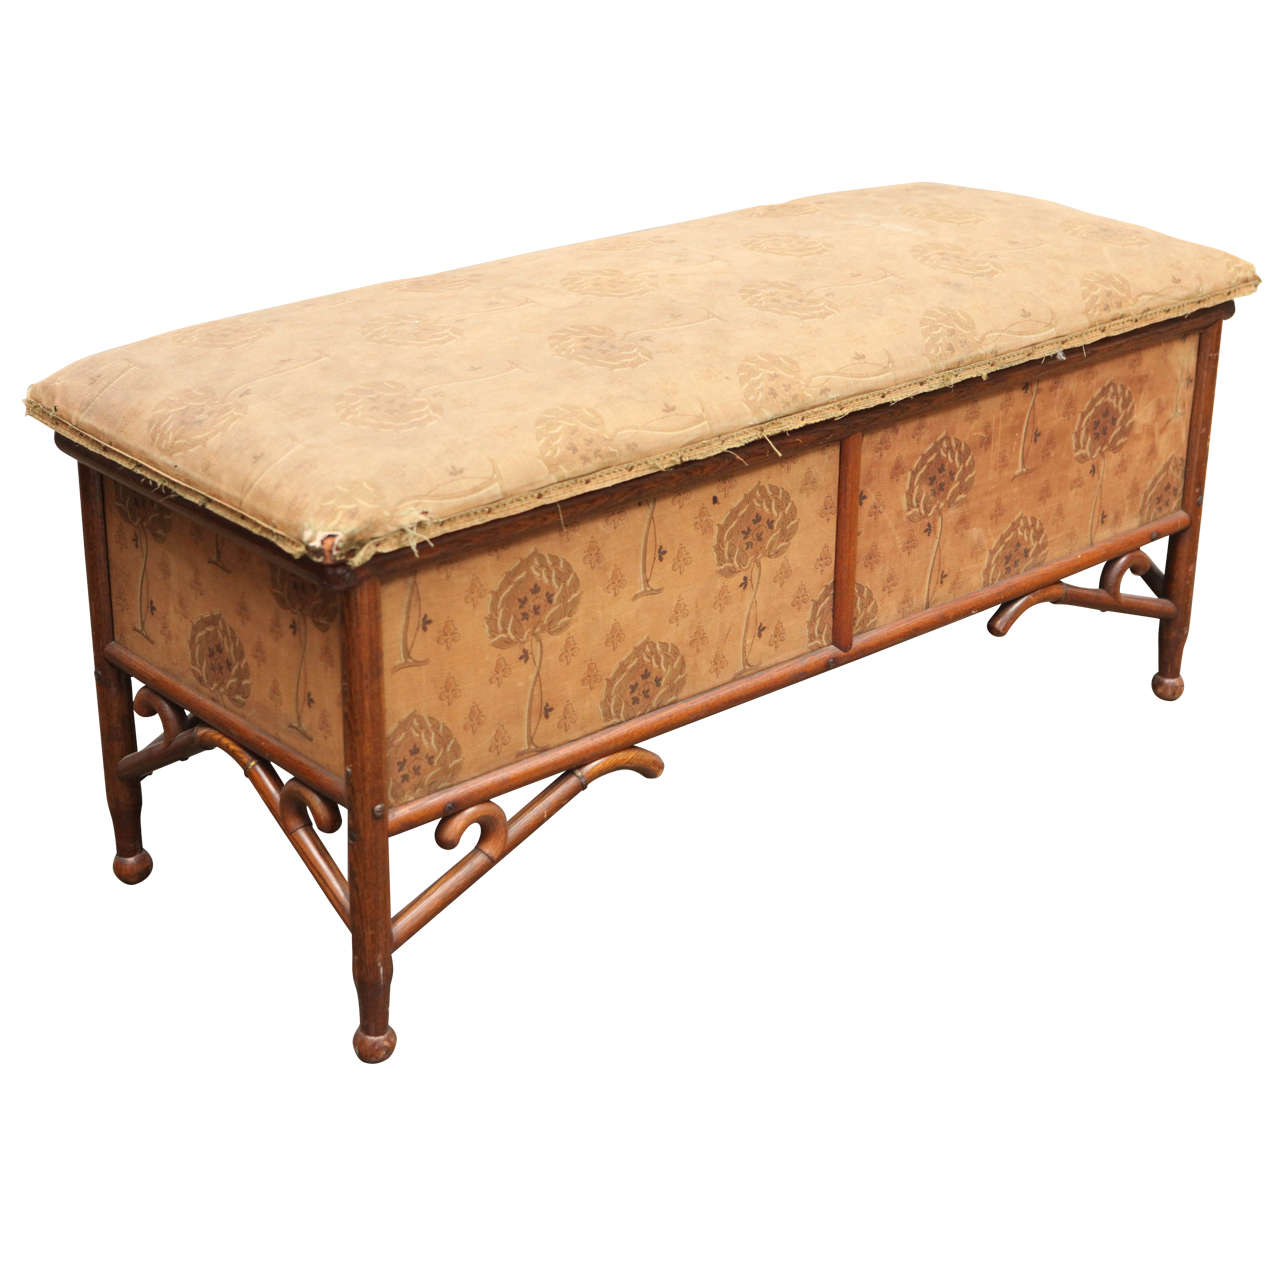 Arts and Crafts Upholstered Bentwood Bench or Trunk